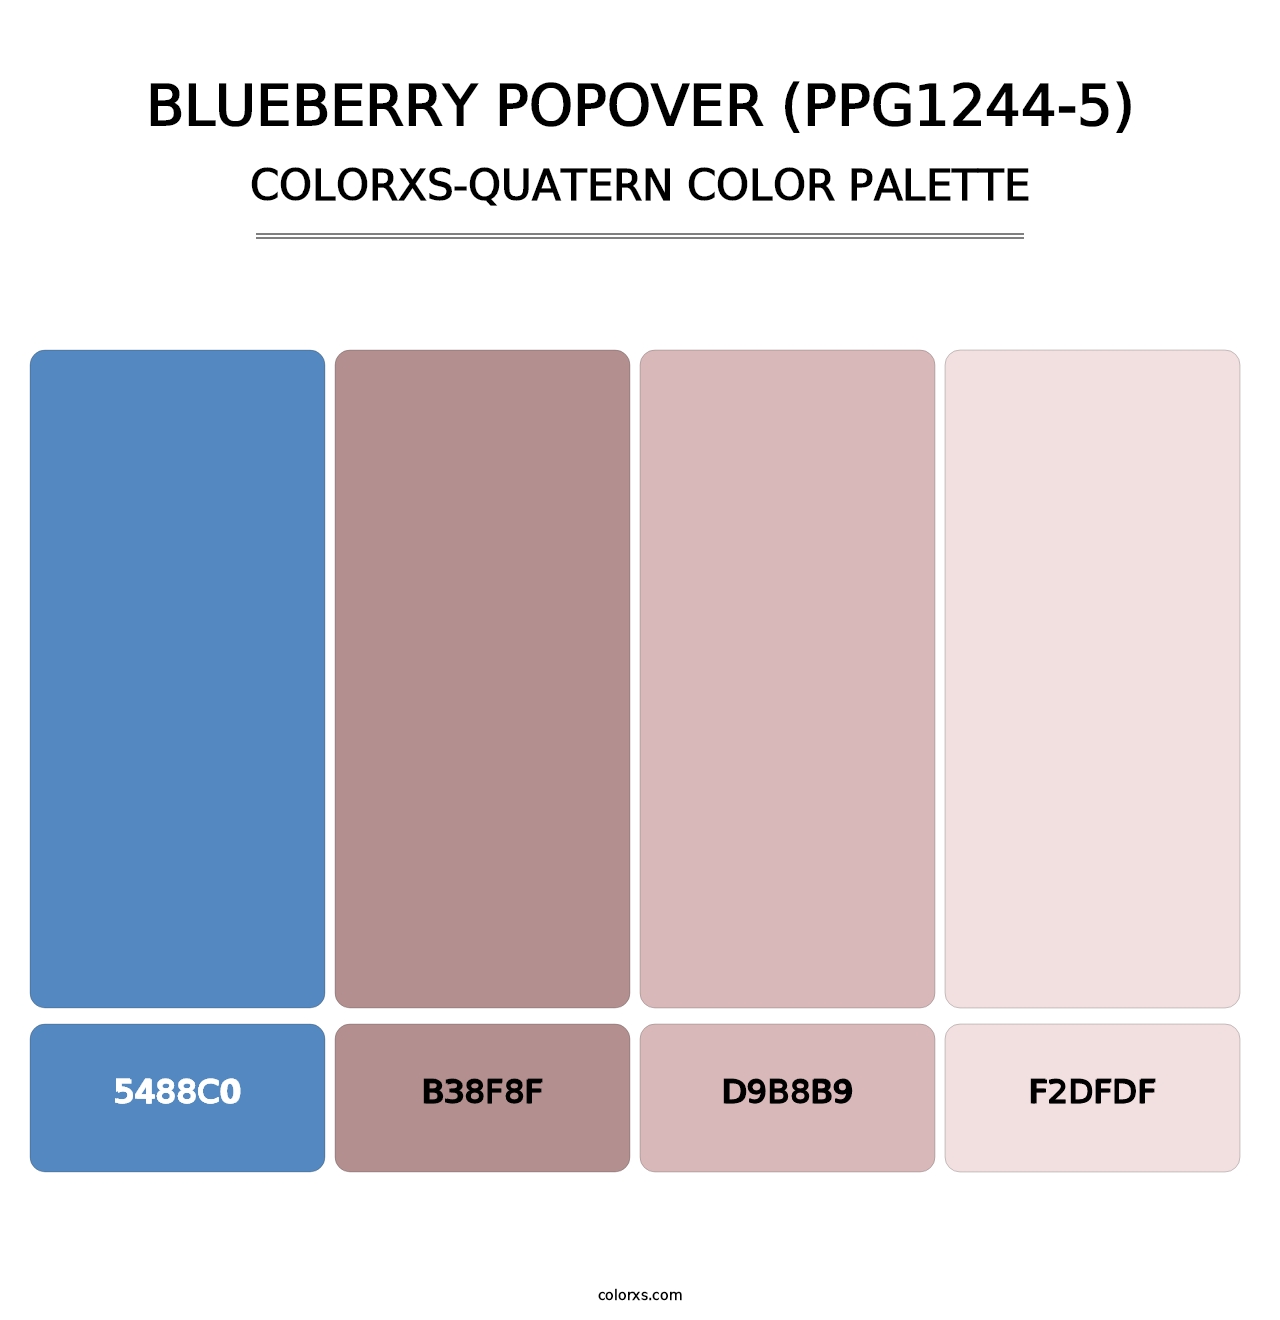 Blueberry Popover (PPG1244-5) - Colorxs Quatern Palette